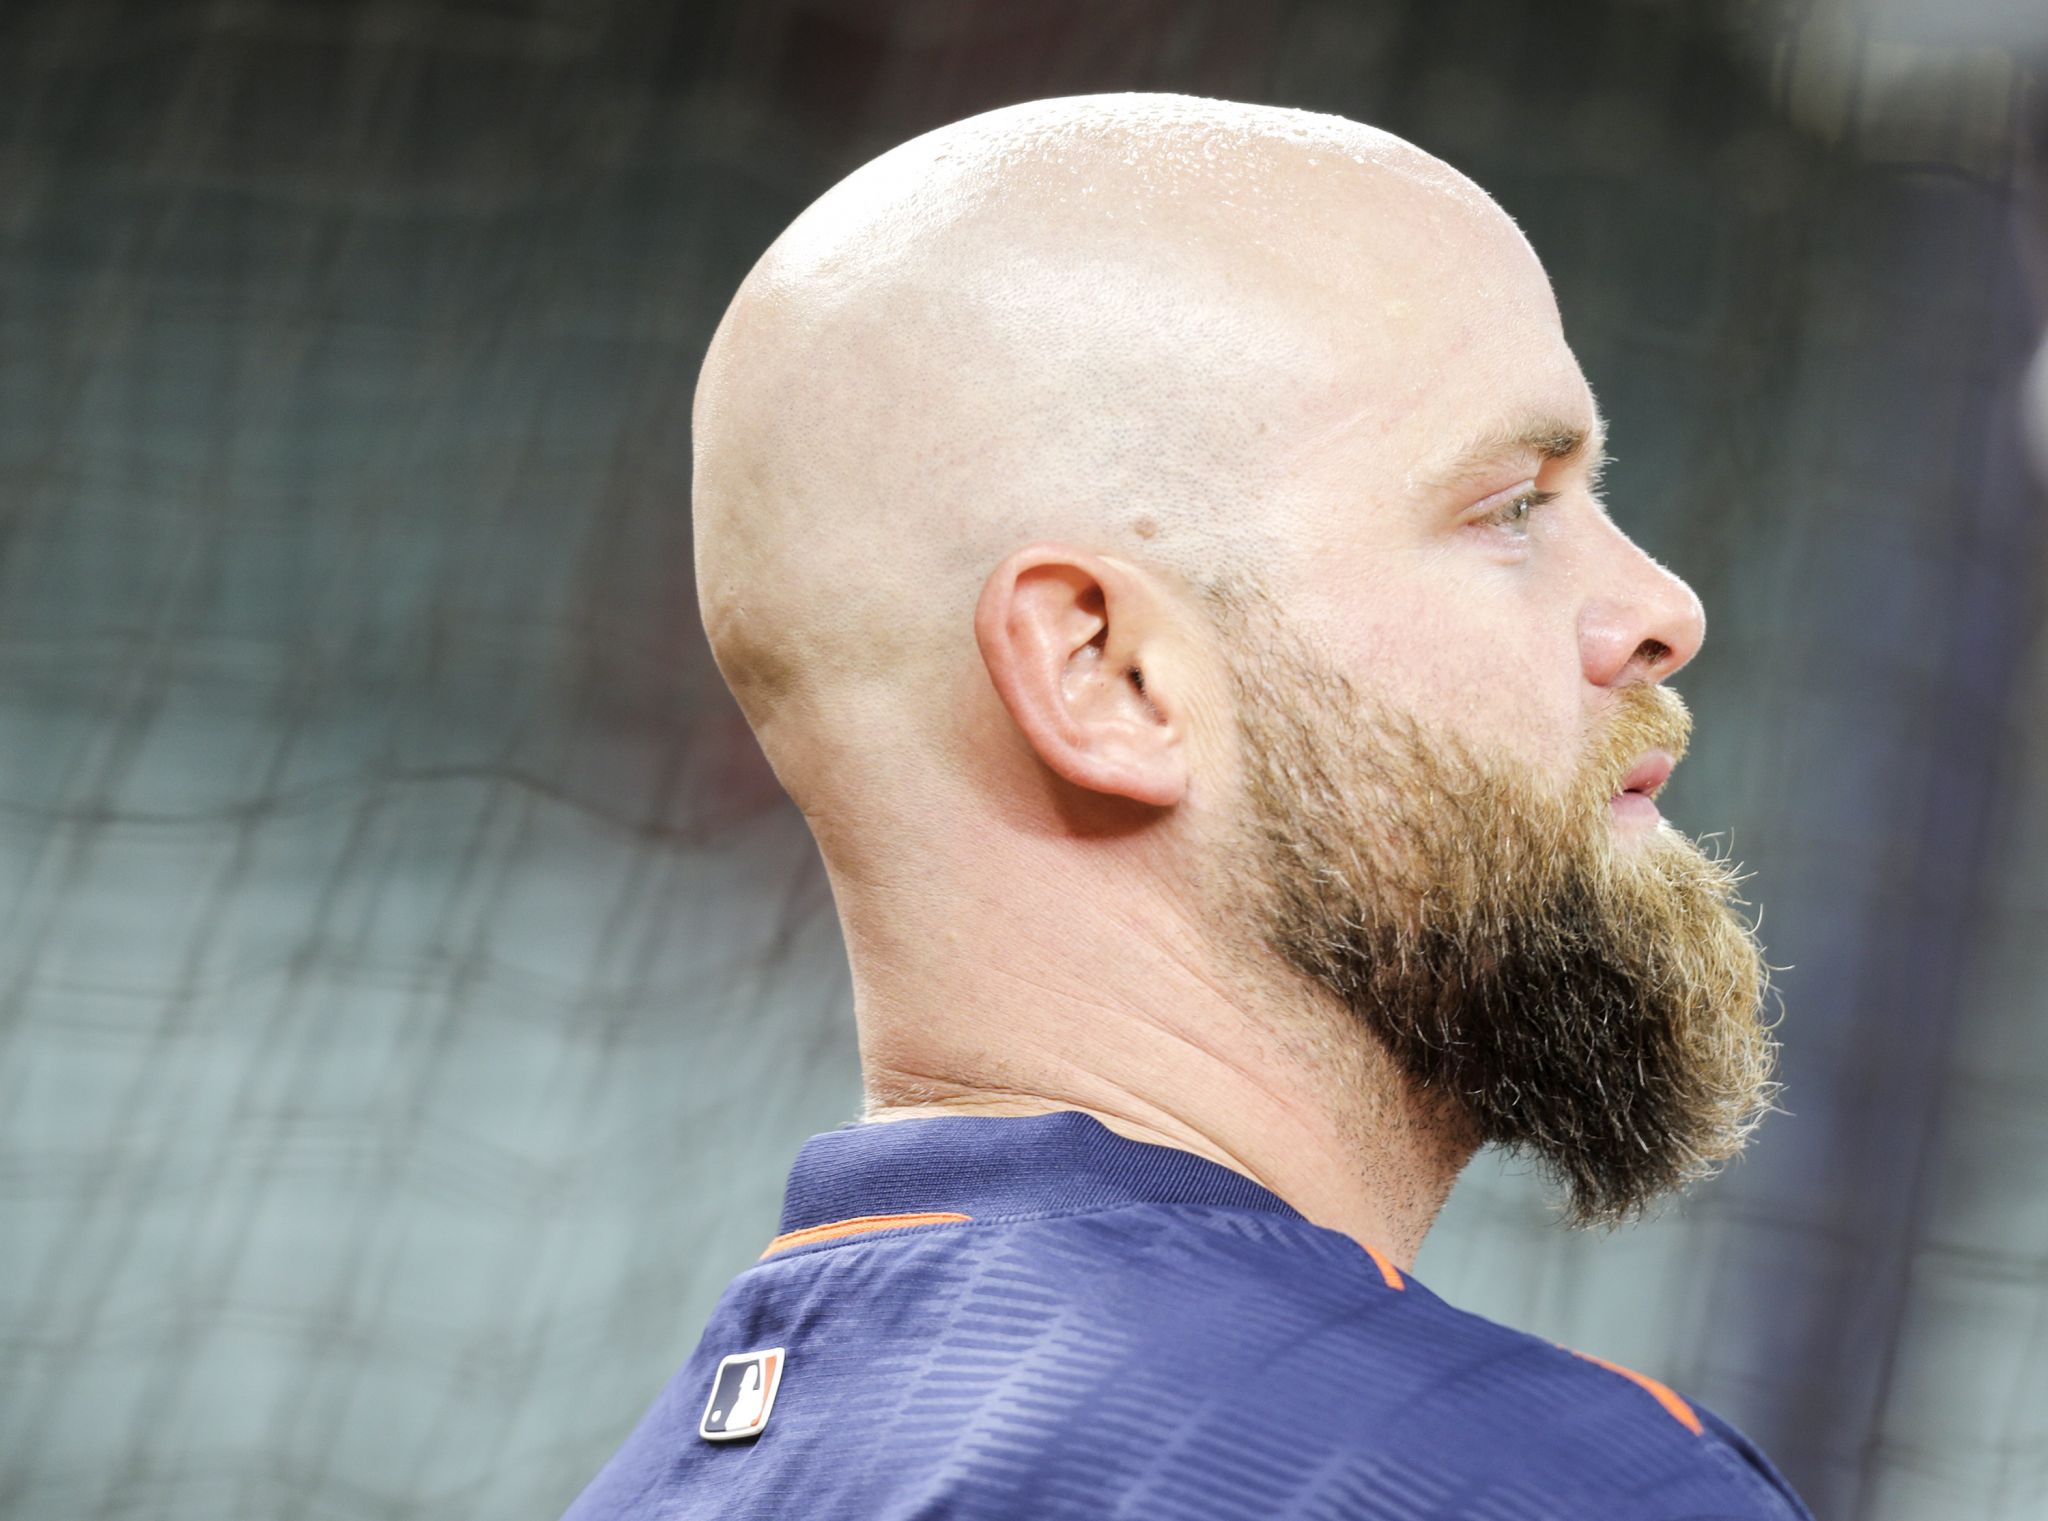 Guess the Astros player by their haircut